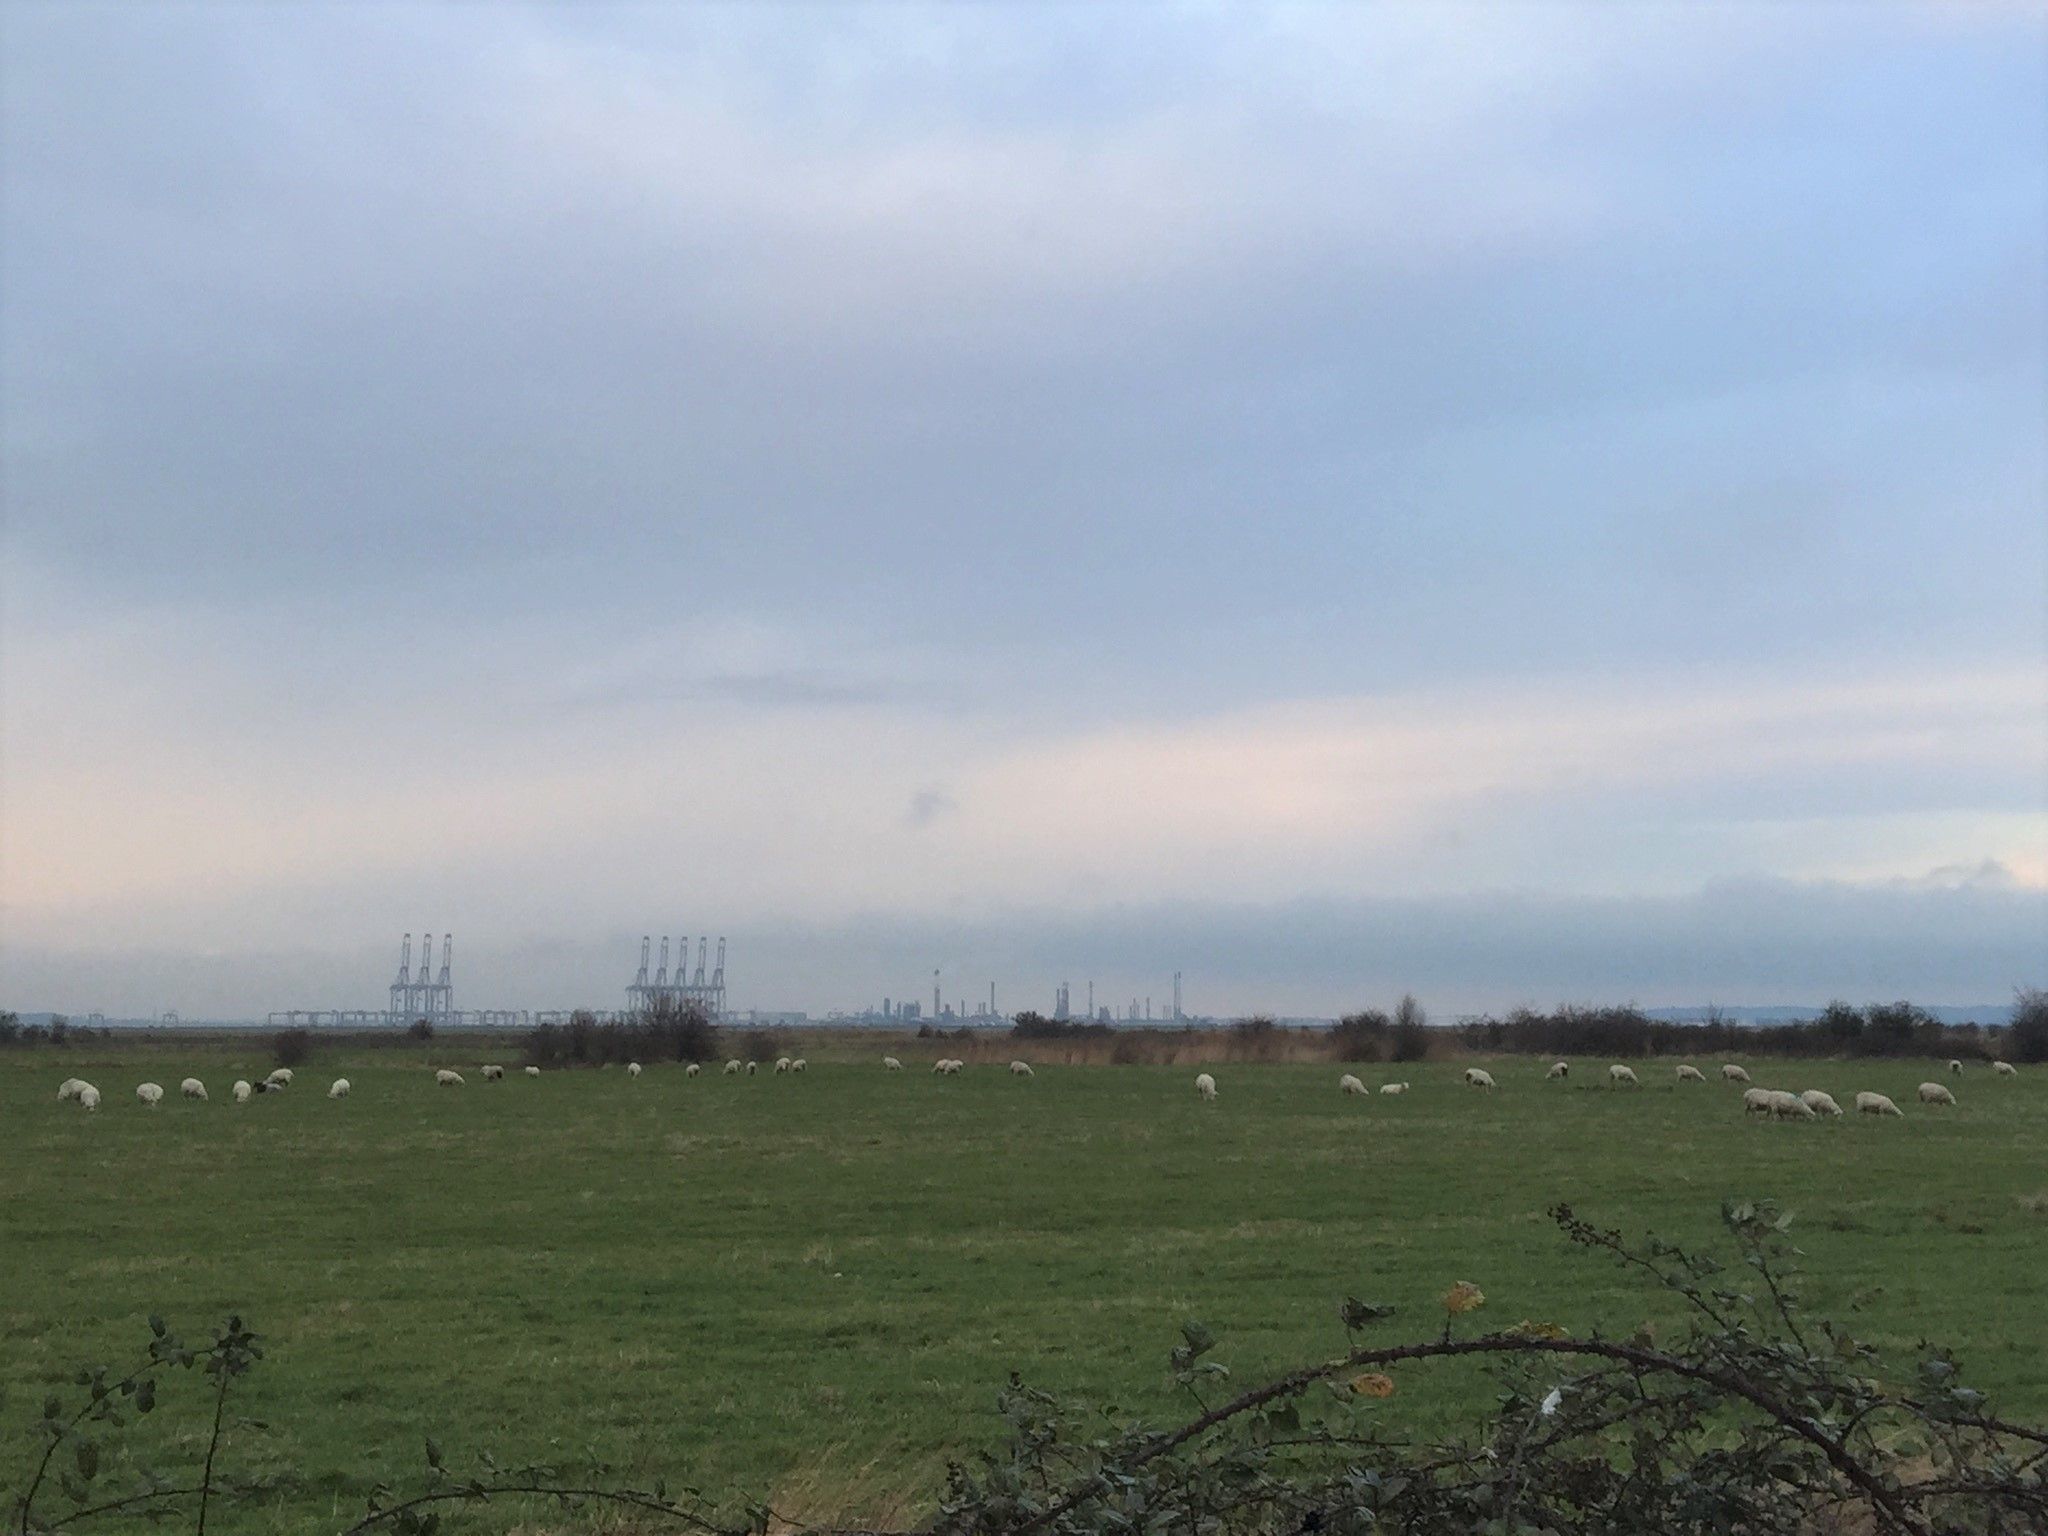 View across one of the farmers fields at Cliffe Marshes